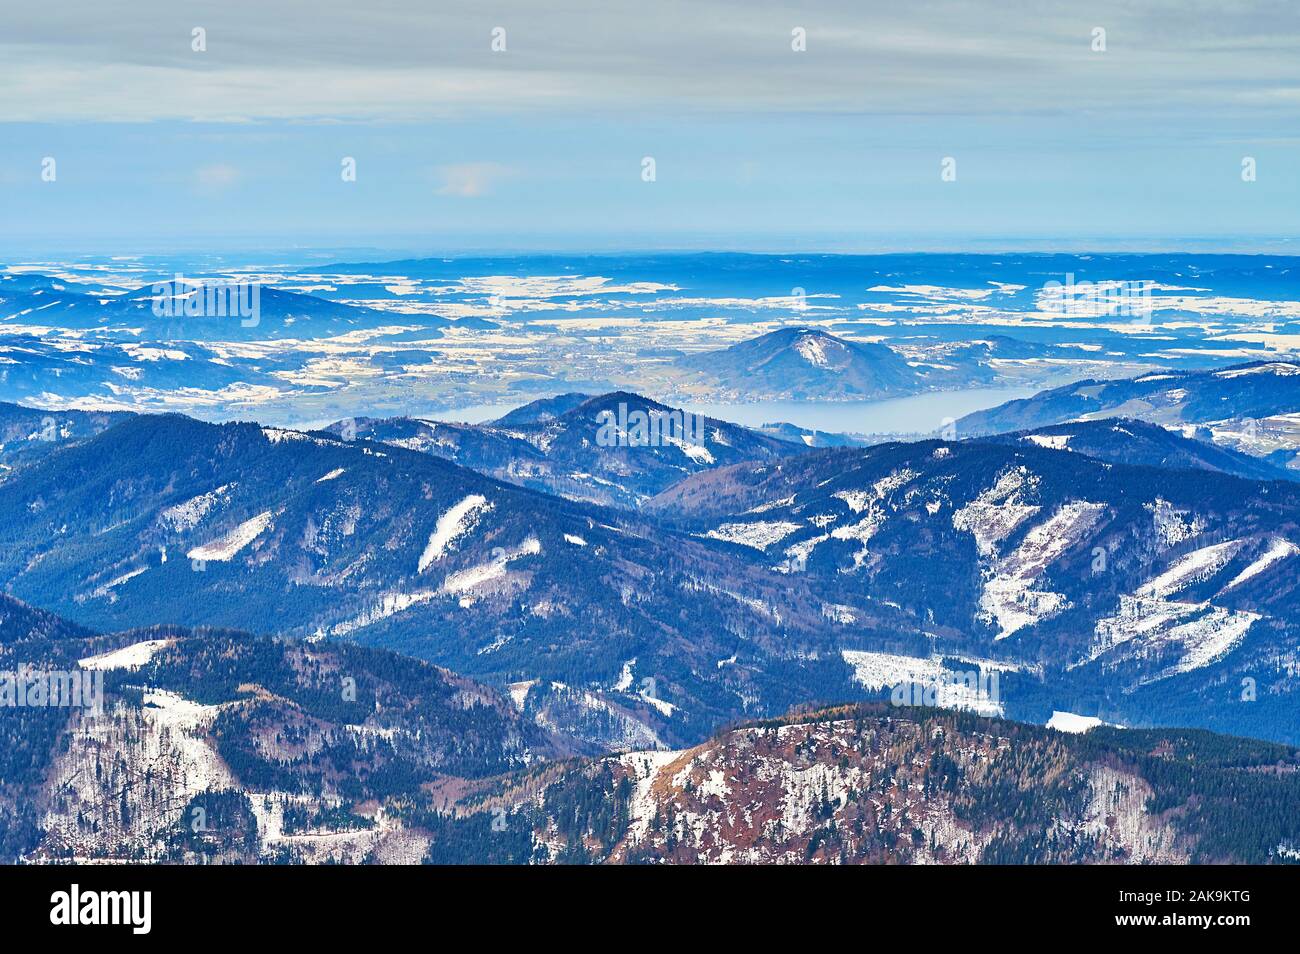 The hazy snowy landscape of Salzkammergut with Attersee lake, hidden behind the rocky slopes, seen from the top of Alberfeldkogel mount, Ebensee, Salz Stock Photo